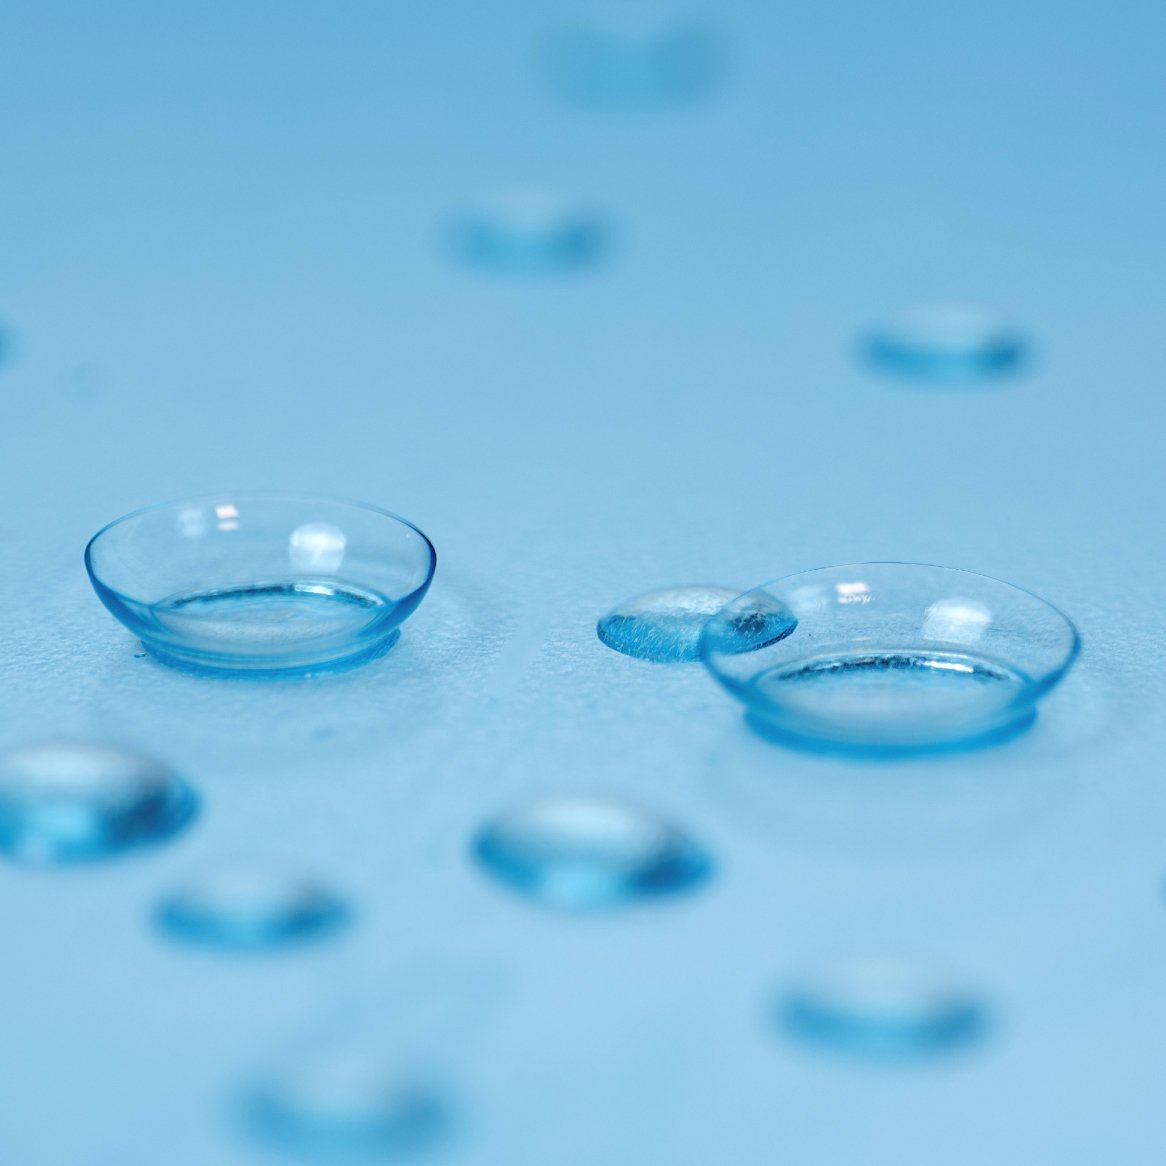 Close-up of contact lenses surrounded by water droplets